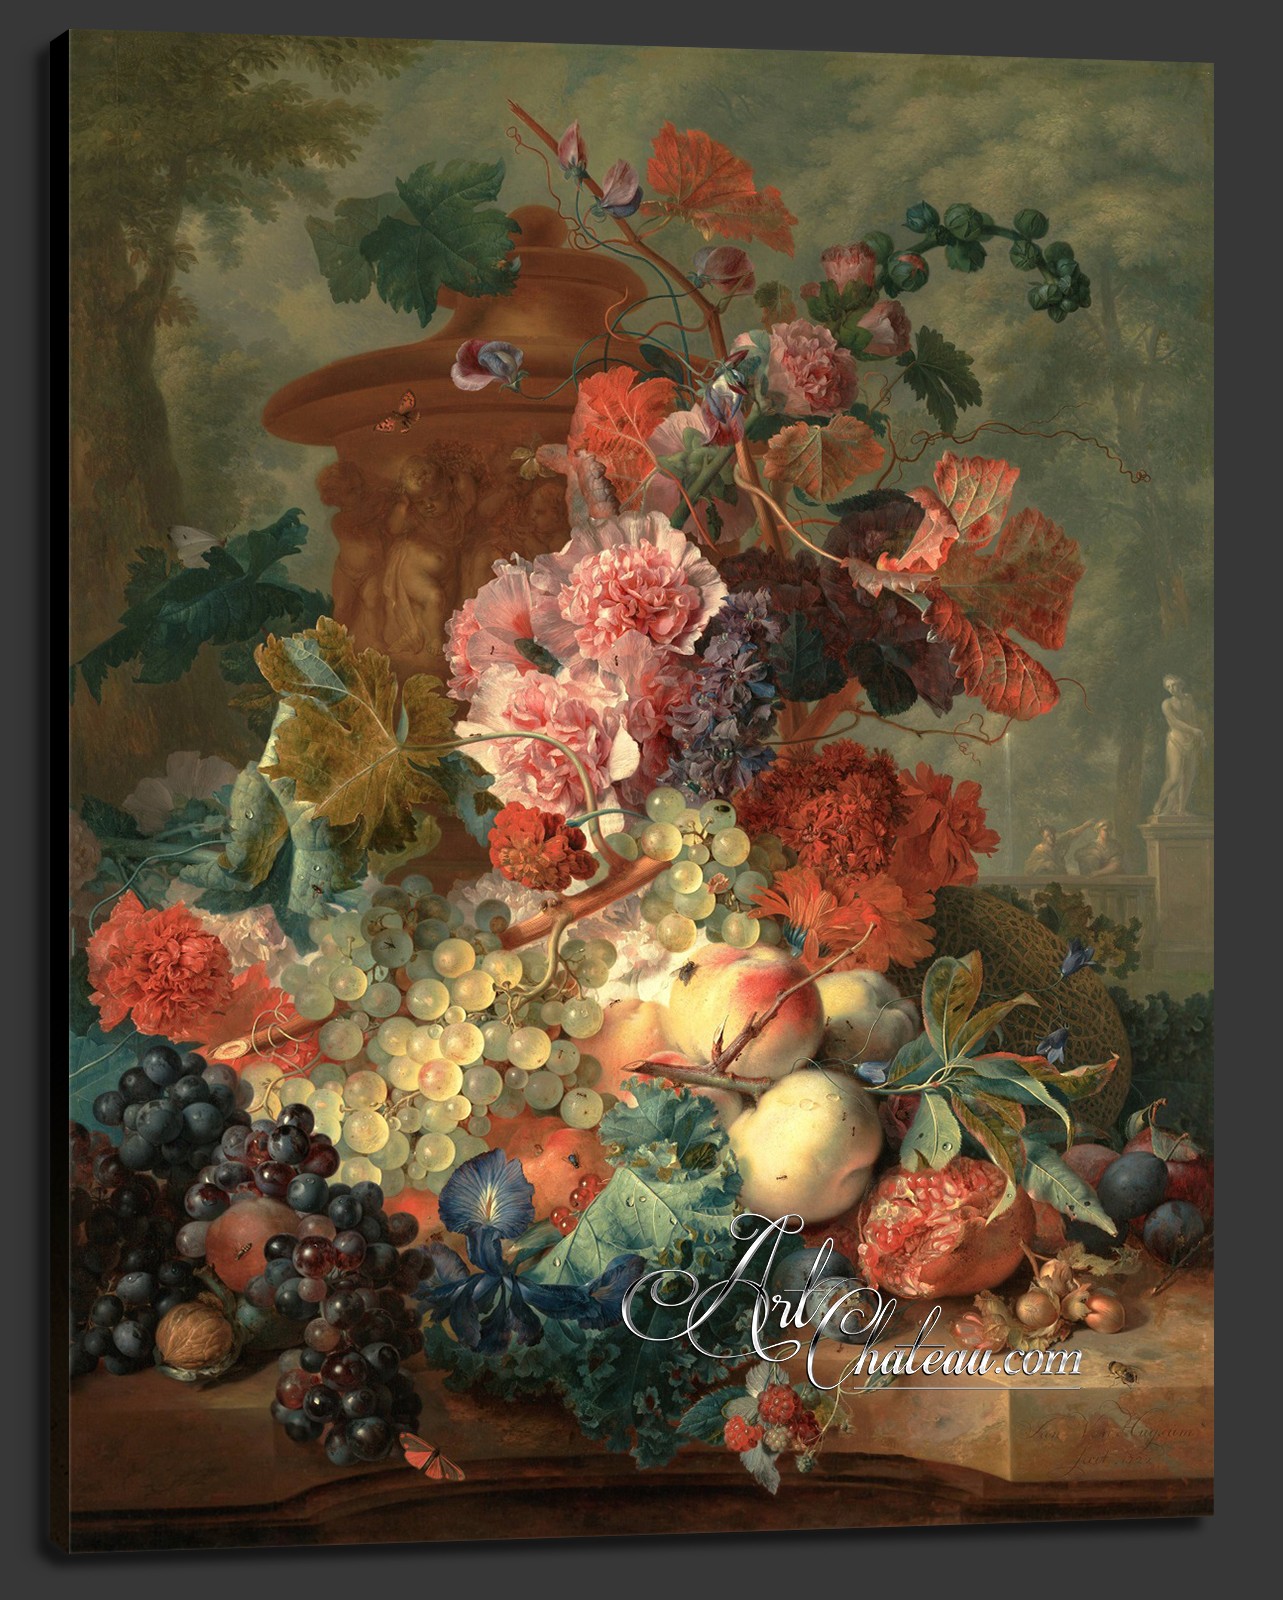 Garland of Flowers, after Abraham Mignon